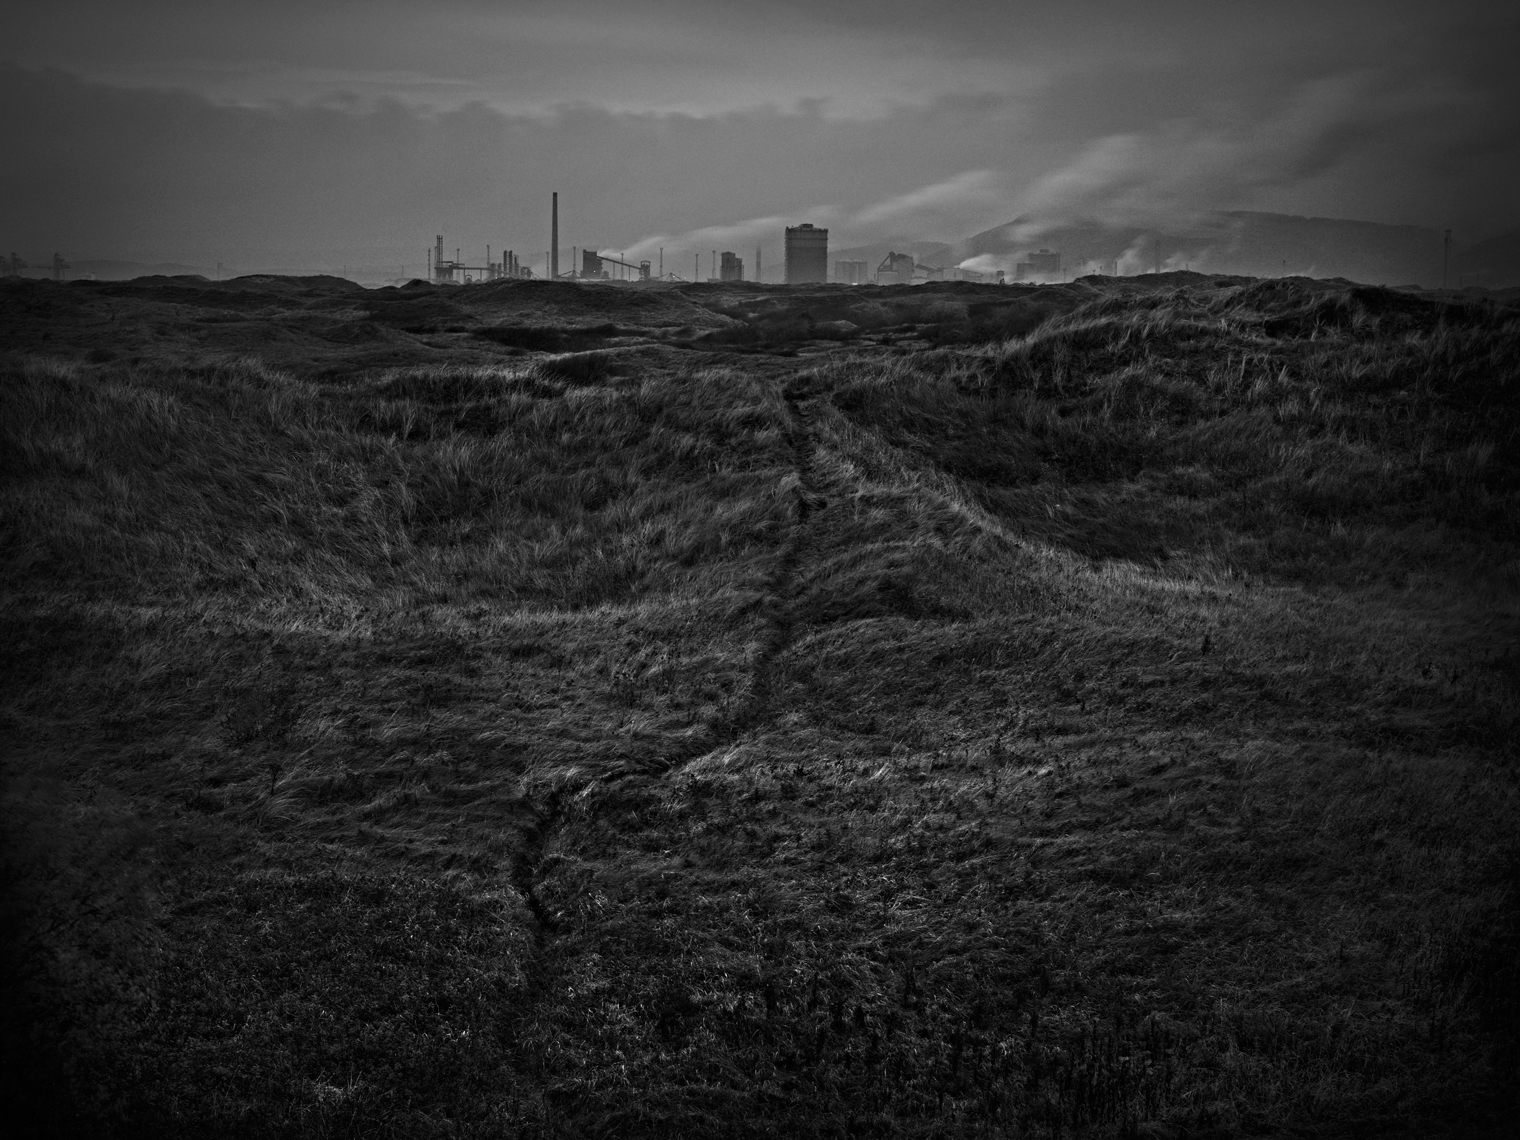 Jon Wyatt Photography - Port Talbot Steelworks and Kenfig Dunes, South Wales